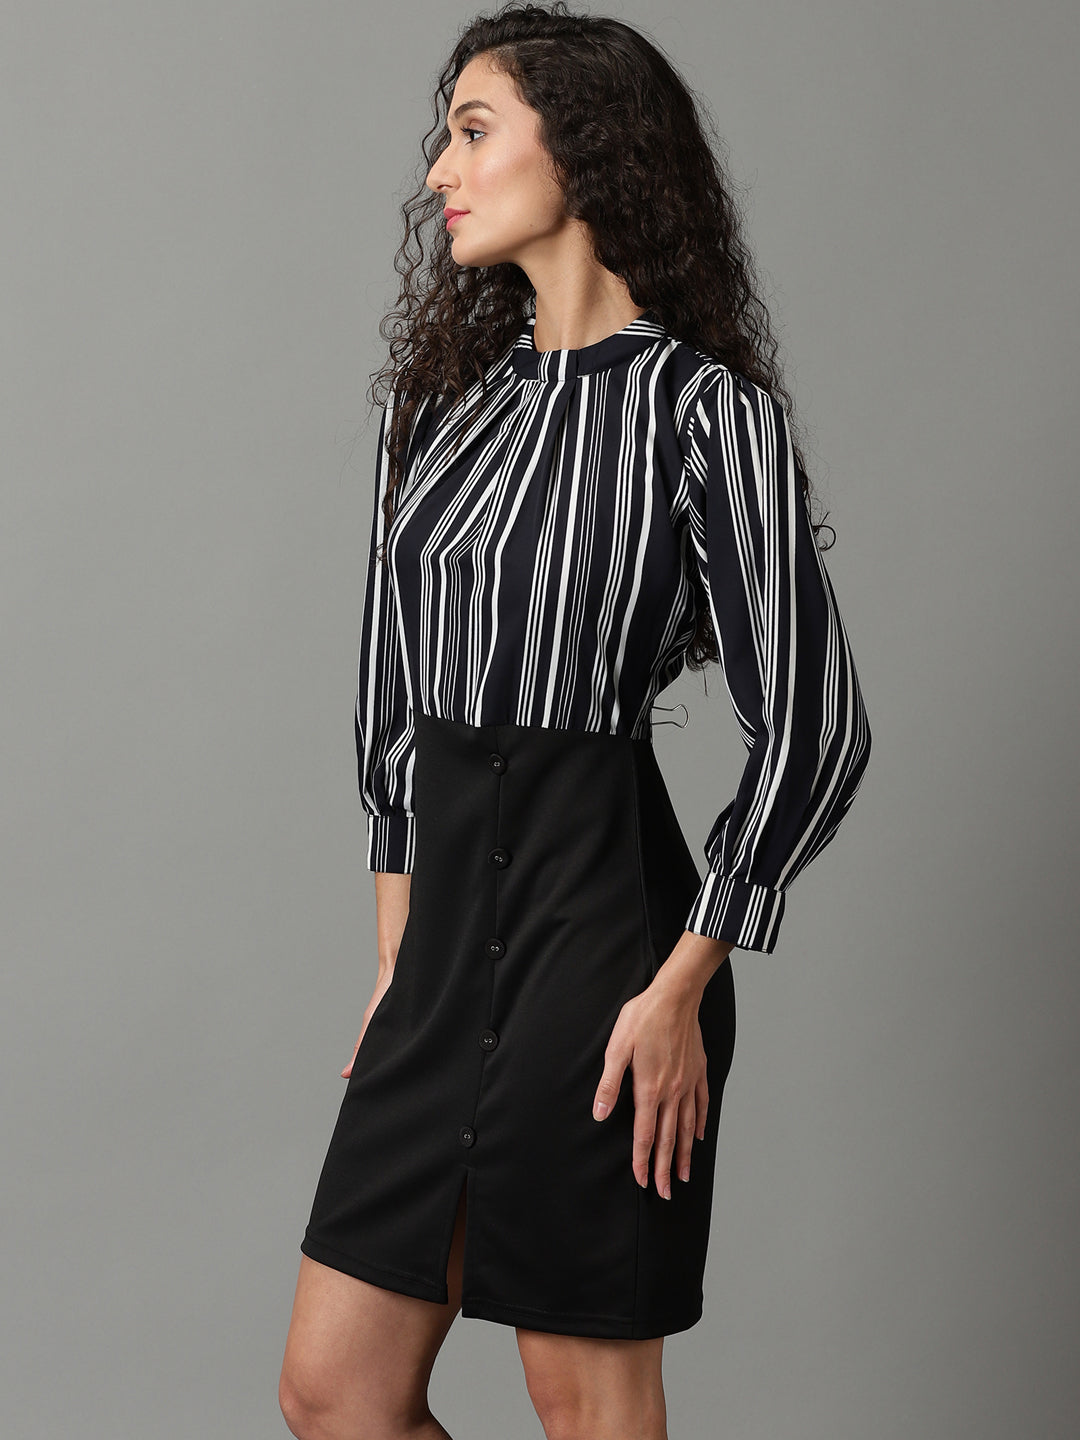 Women's Black Striped Fit and Flare Dress